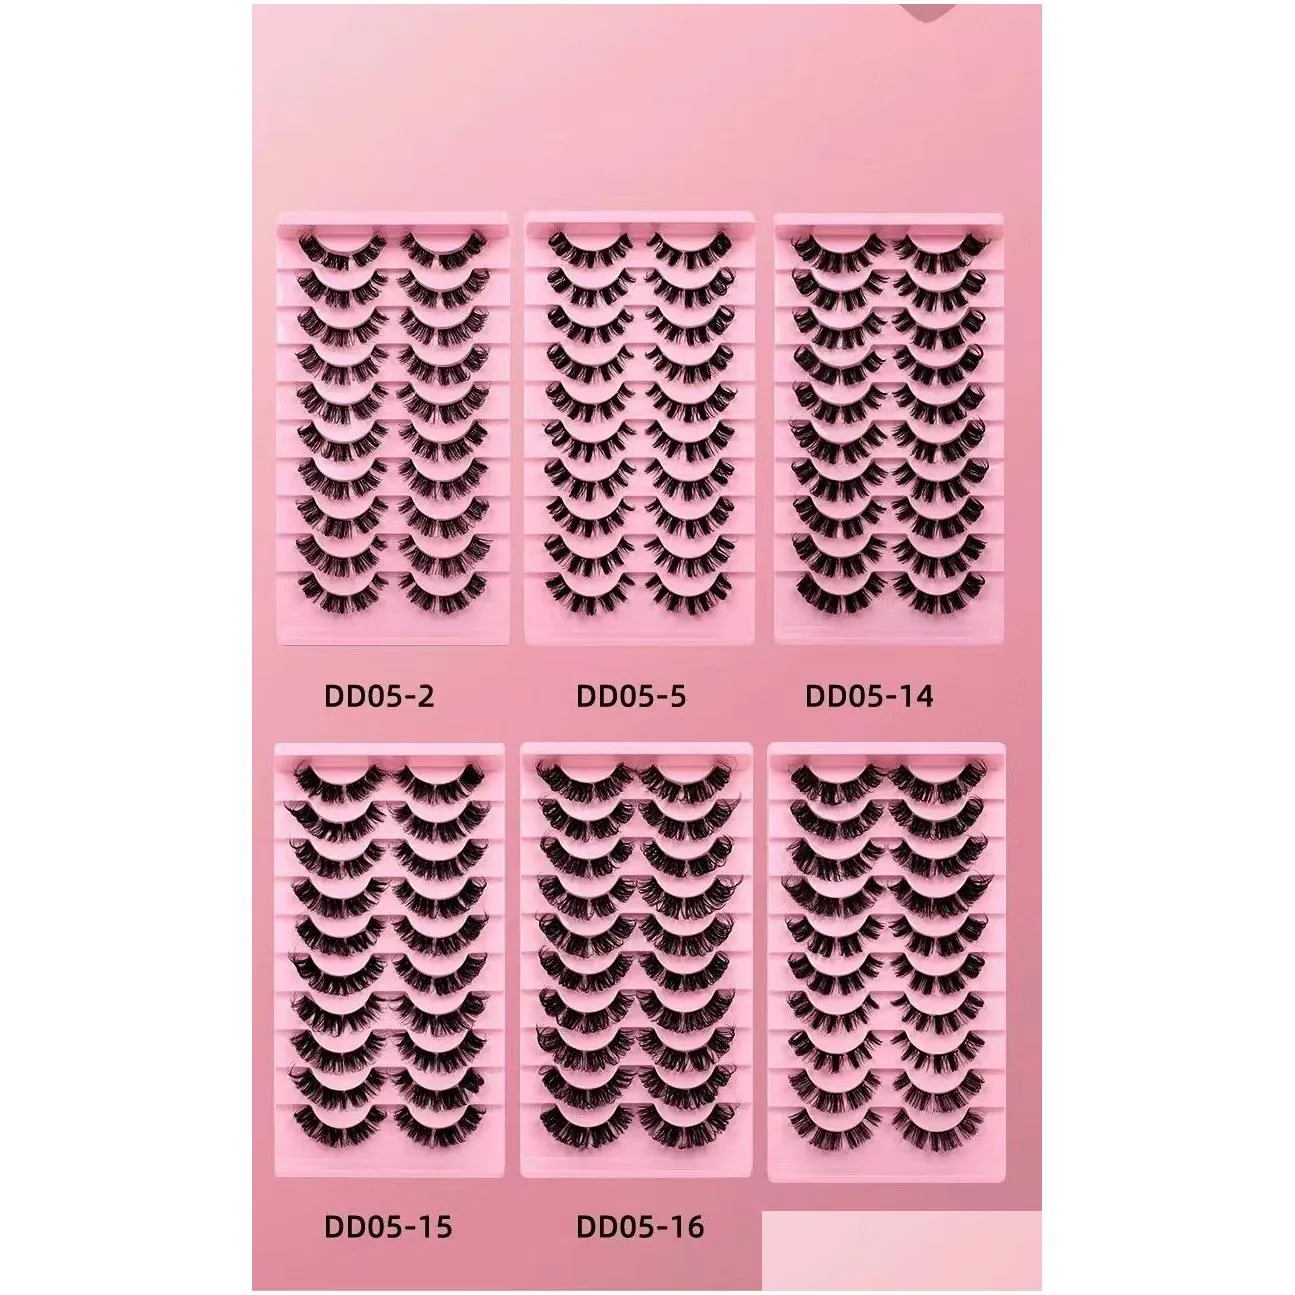 Pairs set False Eyelashes With Pearl Glitter Shiny Stage Eyes Makeup Natural Thick Curling Pearl Eyelash Extension Party Cosplay